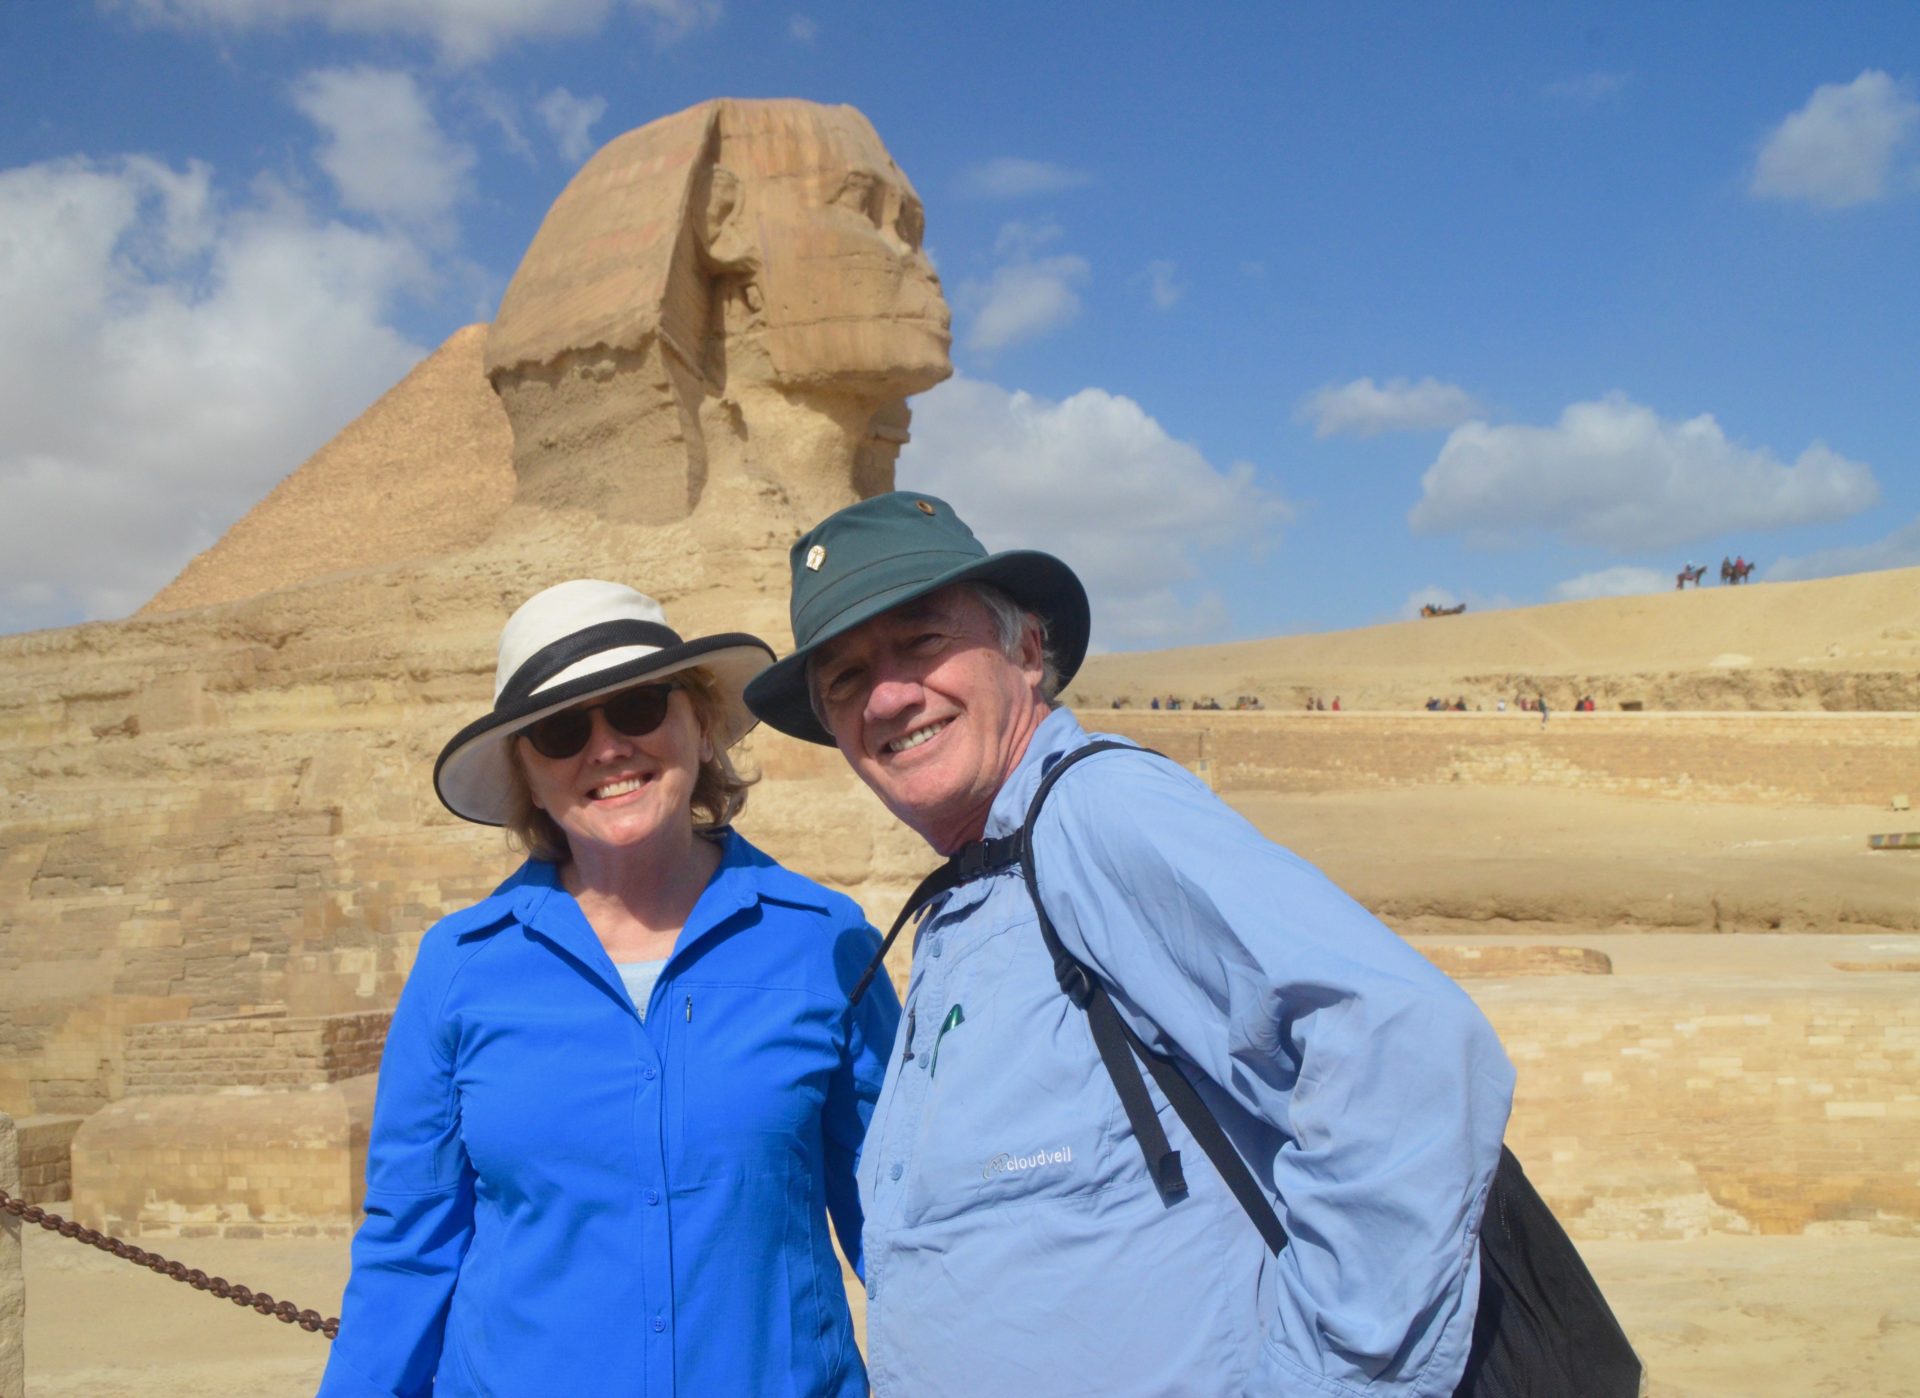 At the Sphinx